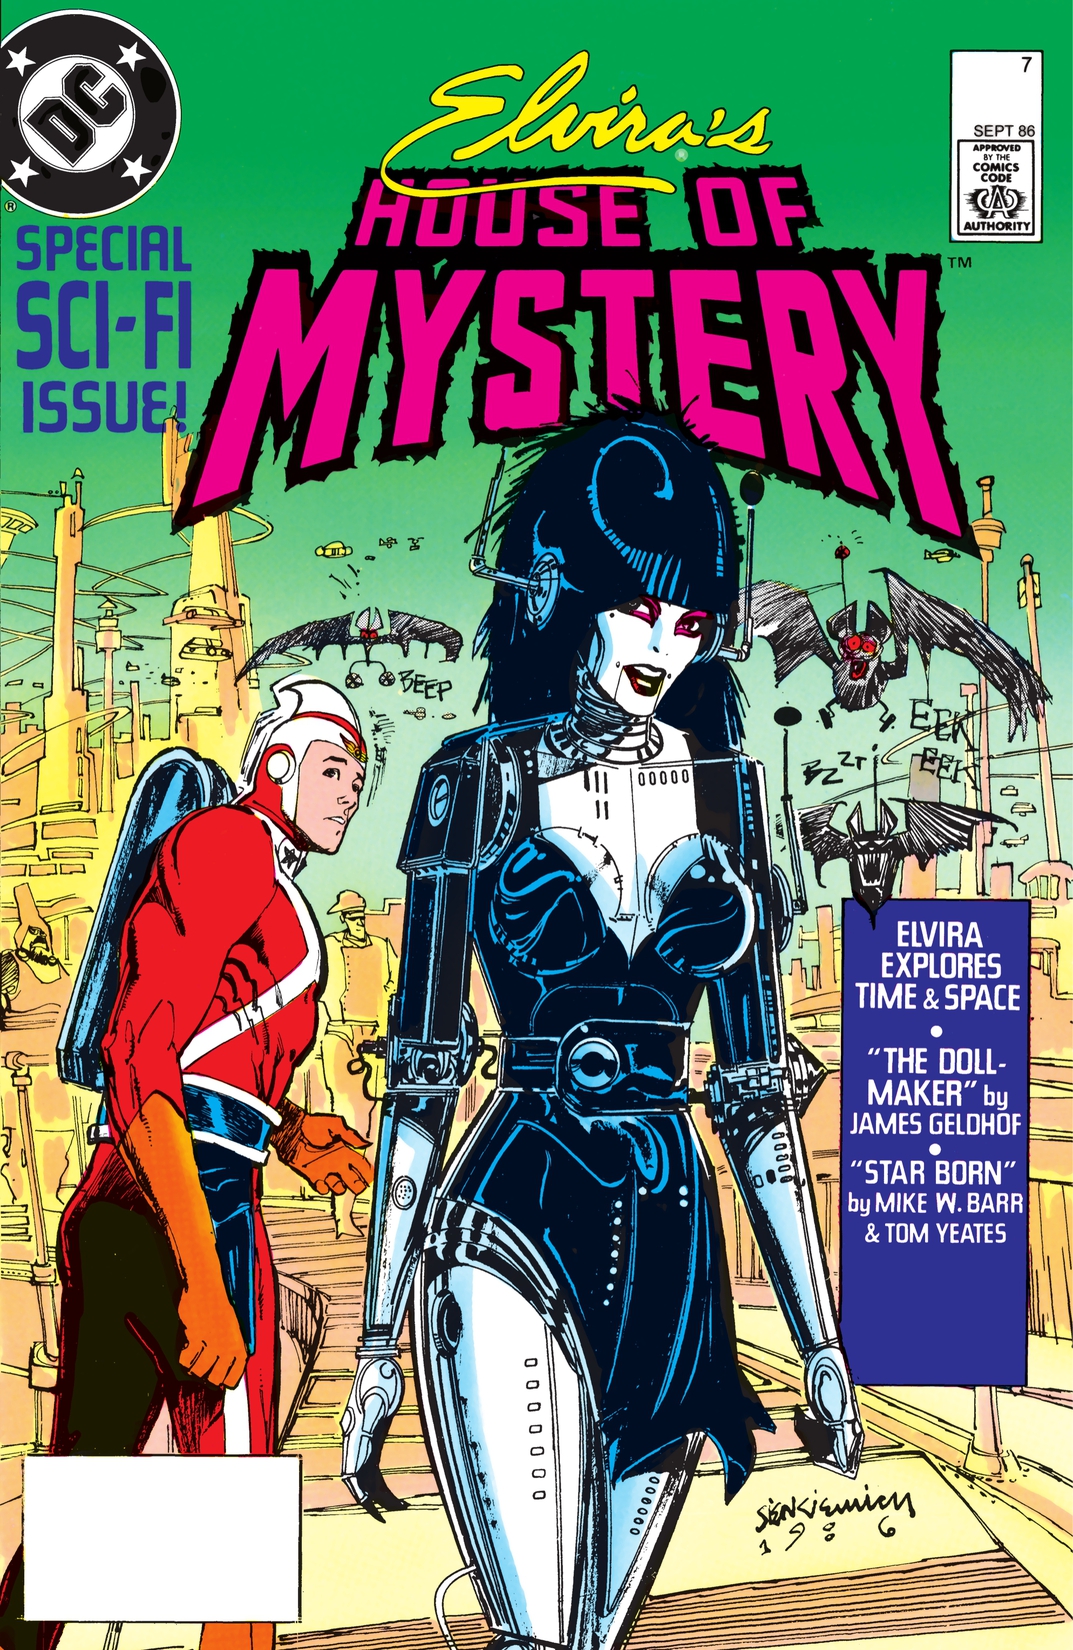 Elvira's House of Mystery #7 preview images